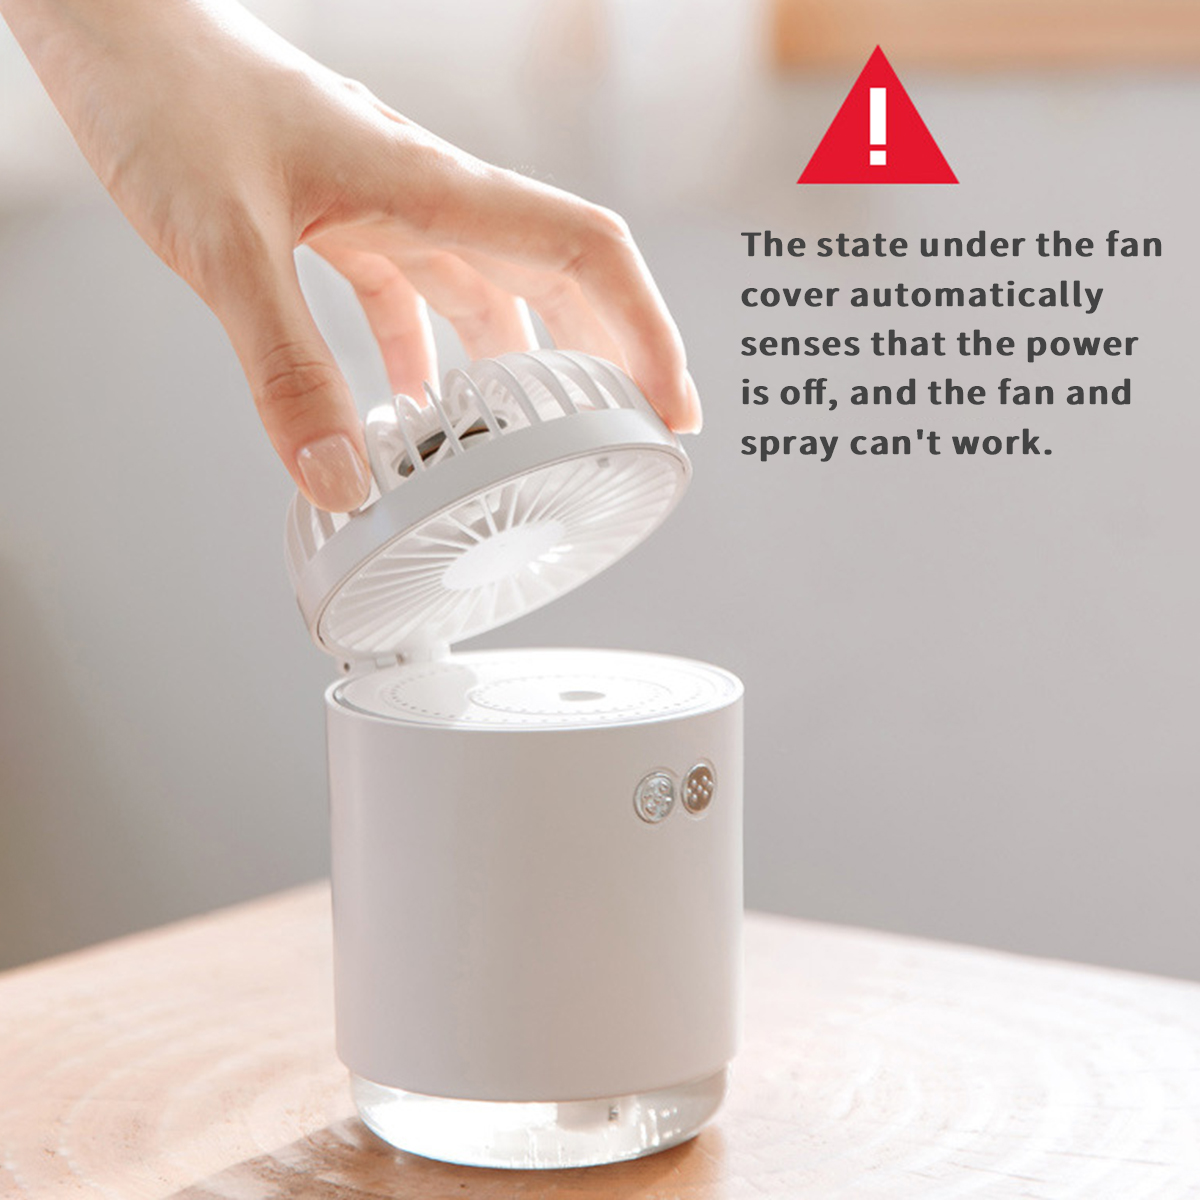 Multifunctional-2000mAh-Mini-USB-Rechargeable-Fan-Cooler-Desktop-Spray-Humidification-with-Colorful--1864518-13